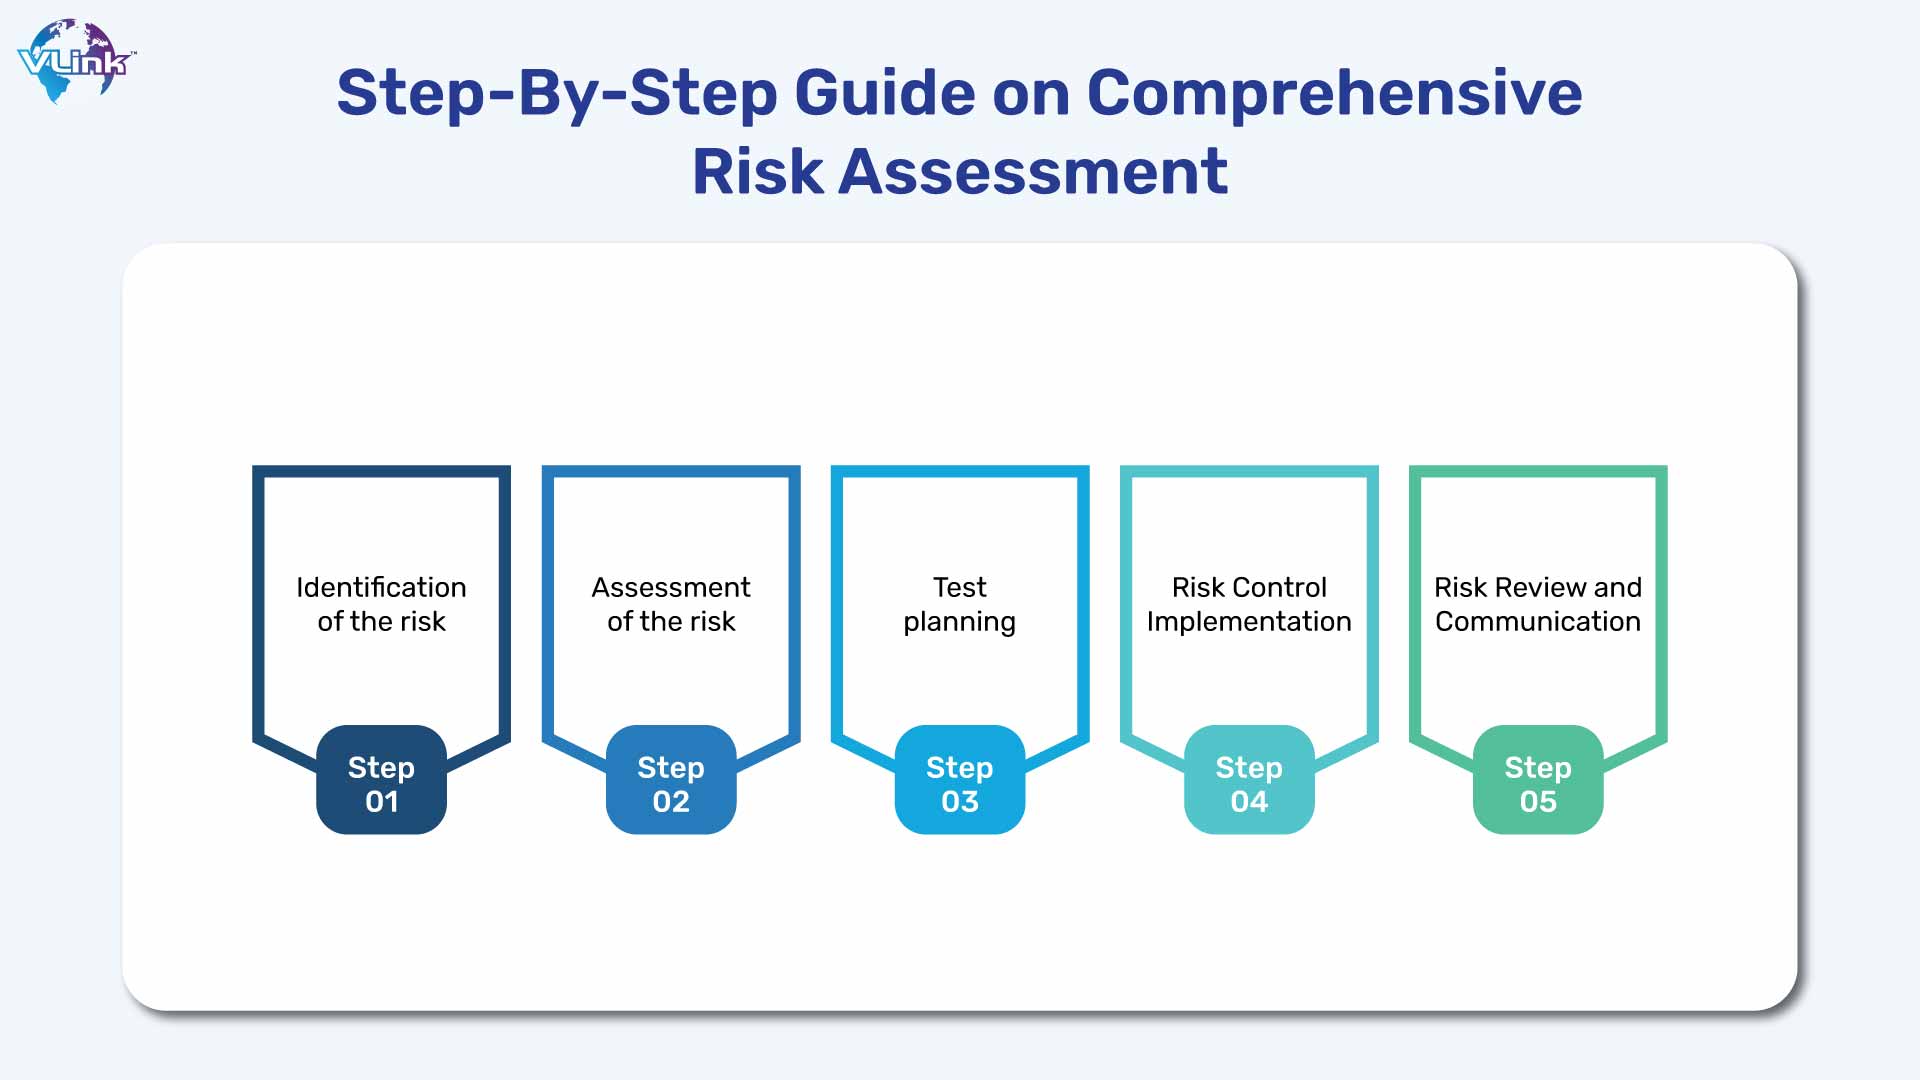 Step-by-Step Guide to Comprehensive Risk Assessment